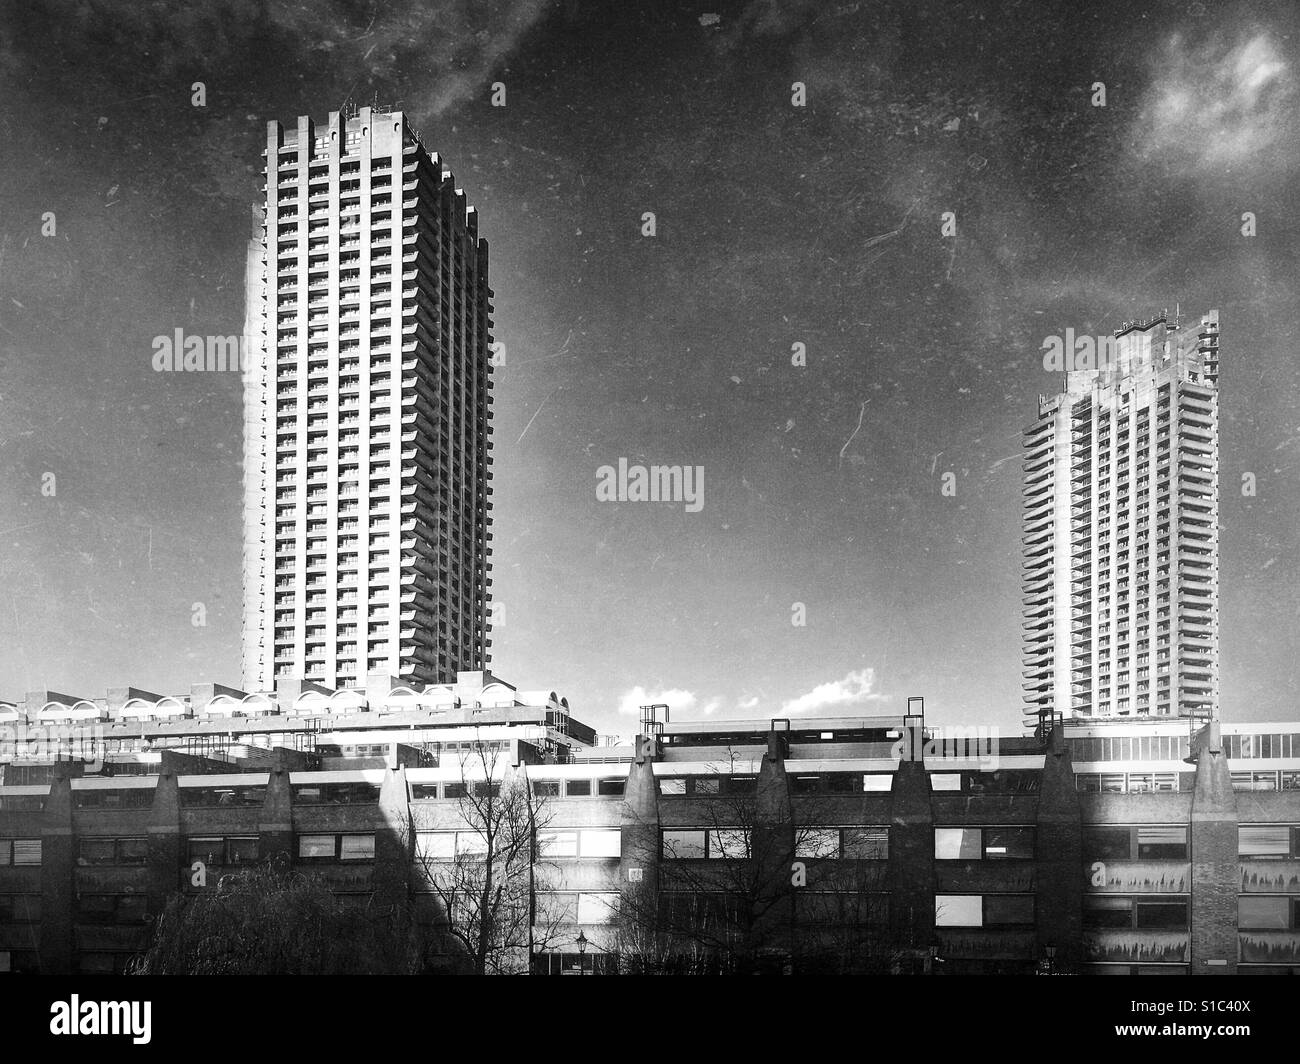 Black and white photo of the tower blocks of the Barbican Estate, a prominent example of British brutalist architecture, in London, England, UK. Stock Photo